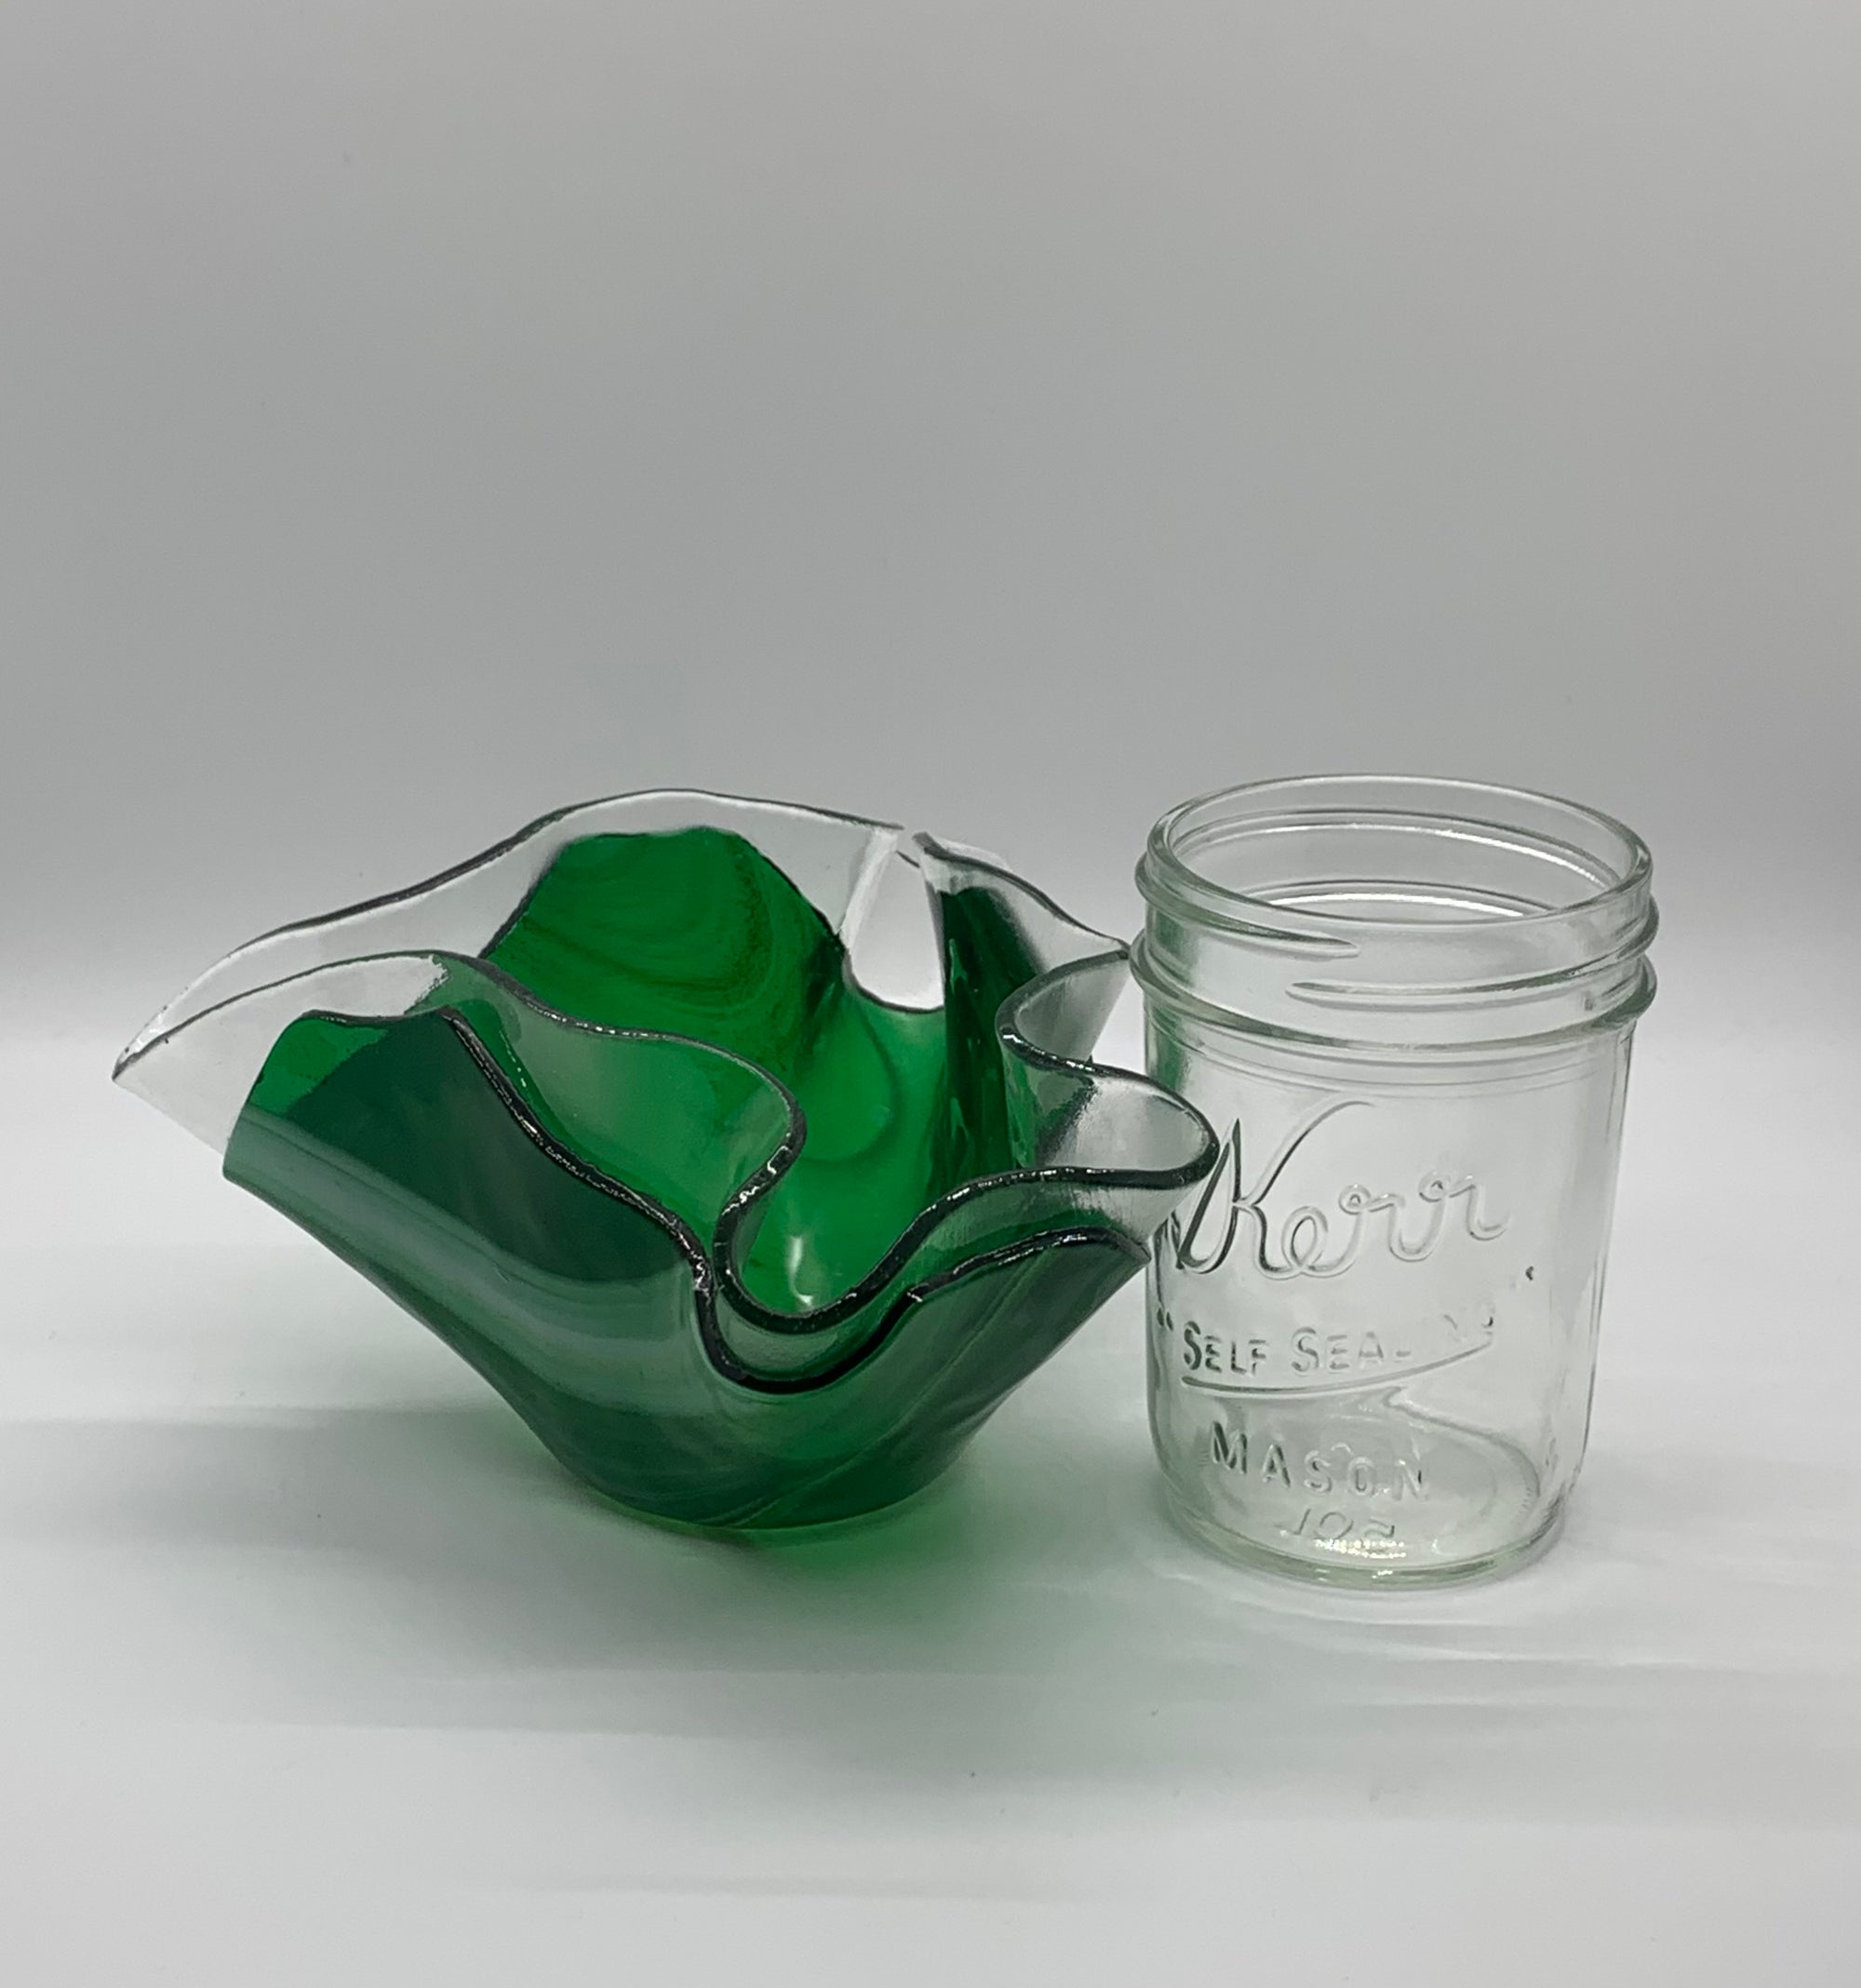 Medium Green and Clear Flower Shapes Pot CC